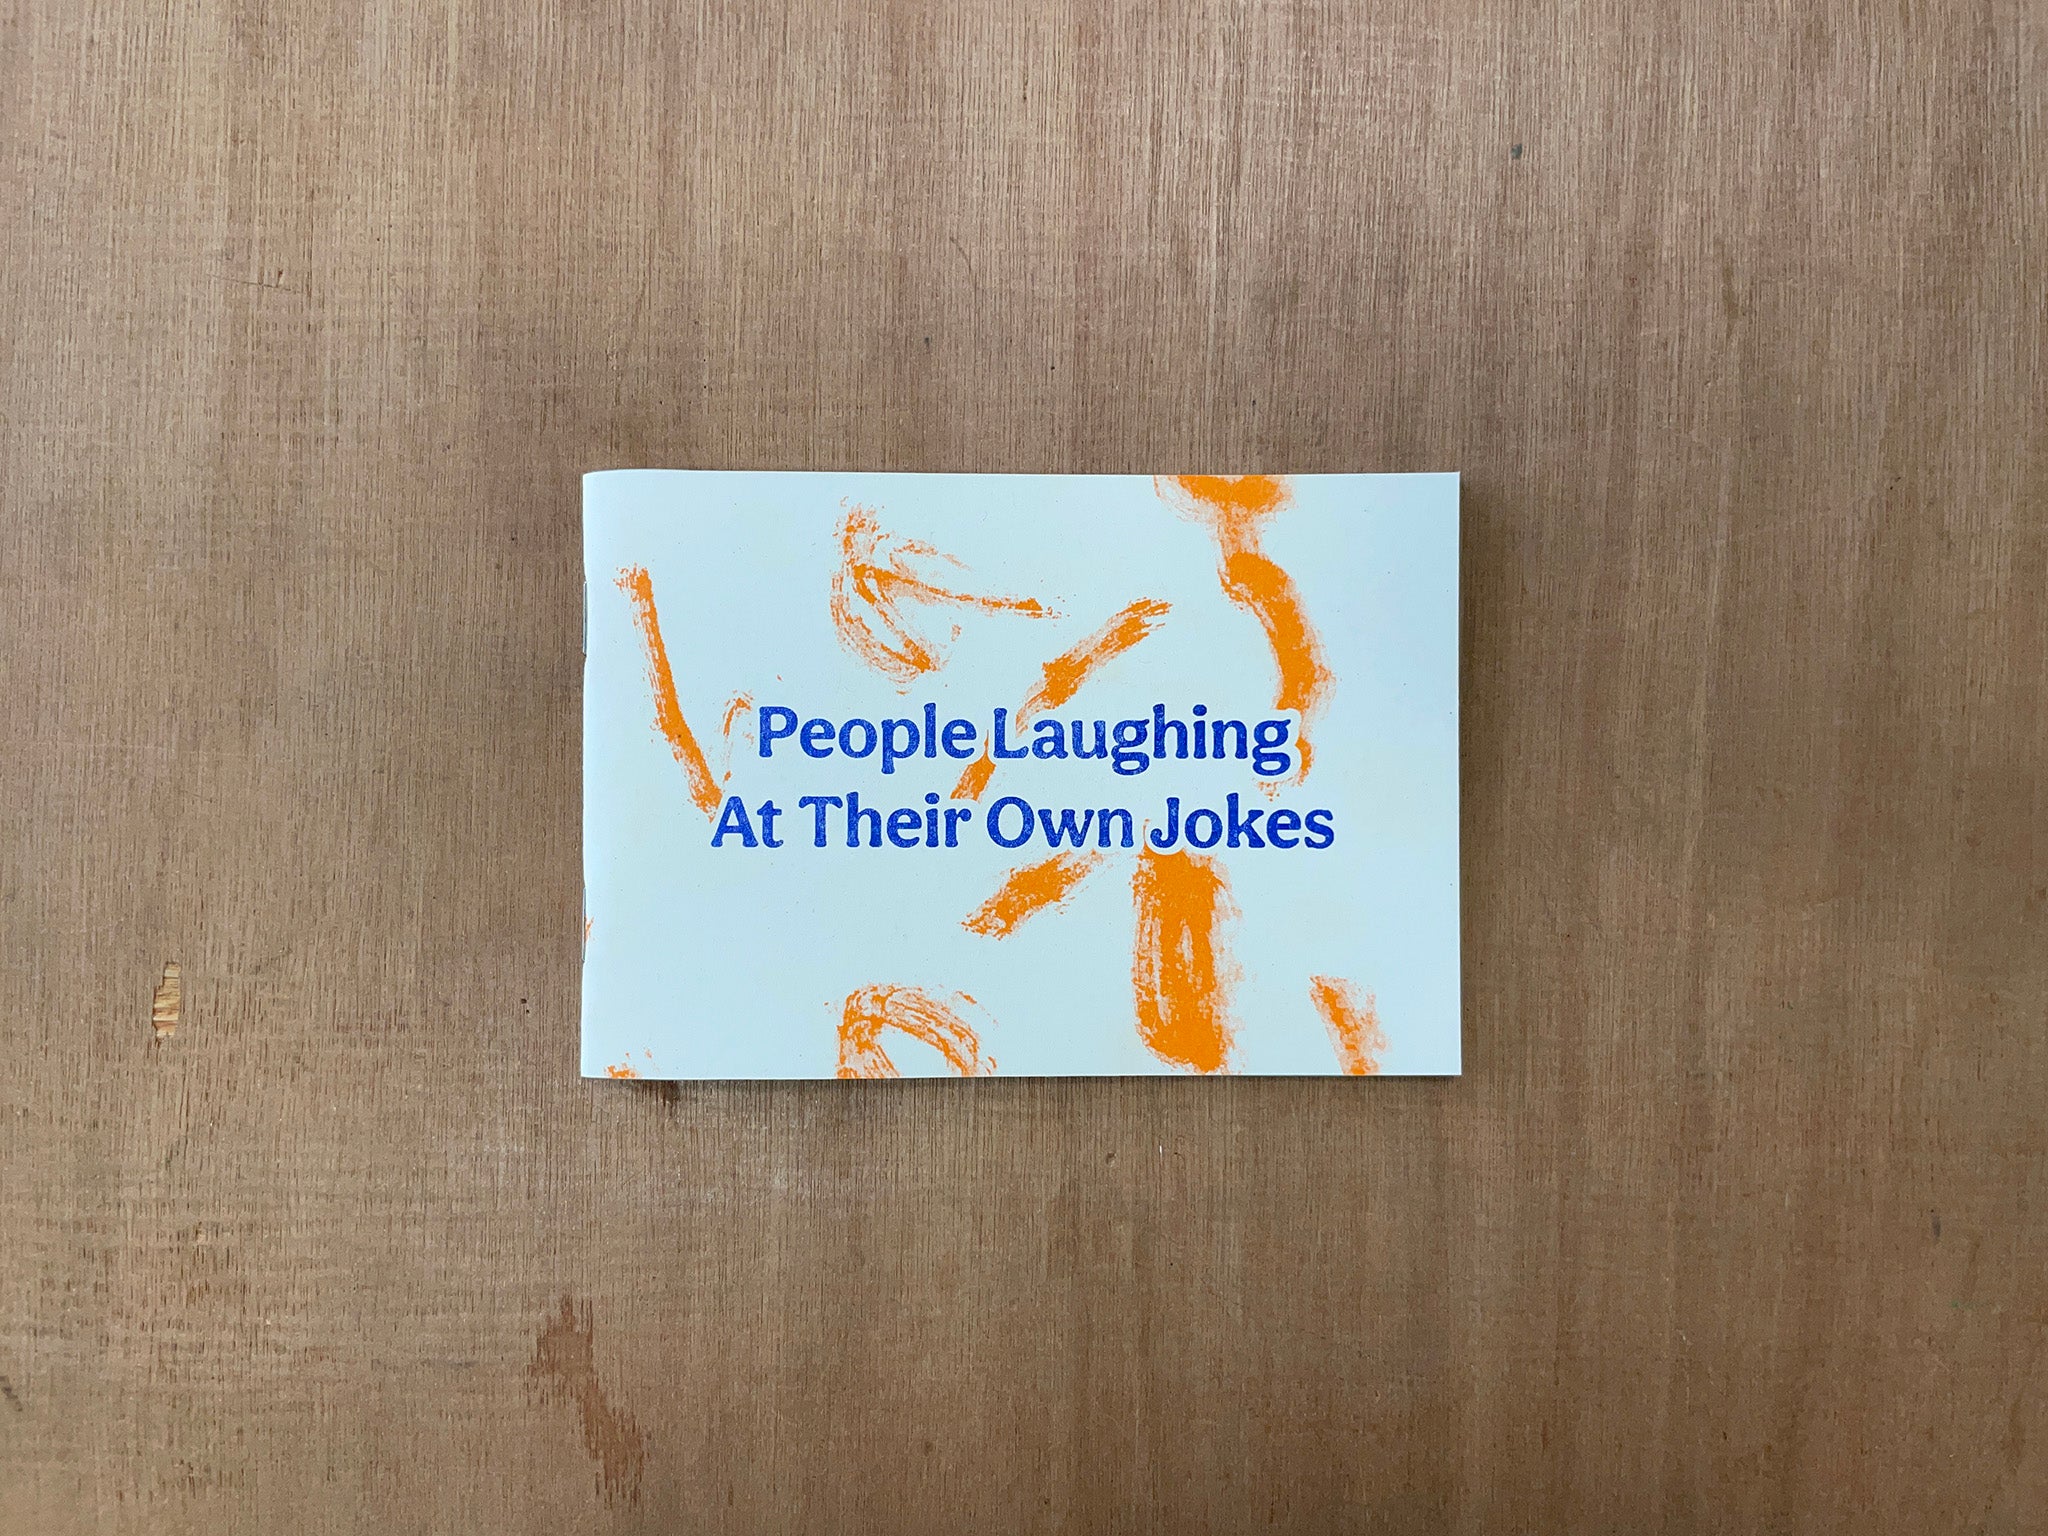 PEOPLE LAUGHING AT THEIR OWN JOKES by Jason Kerley